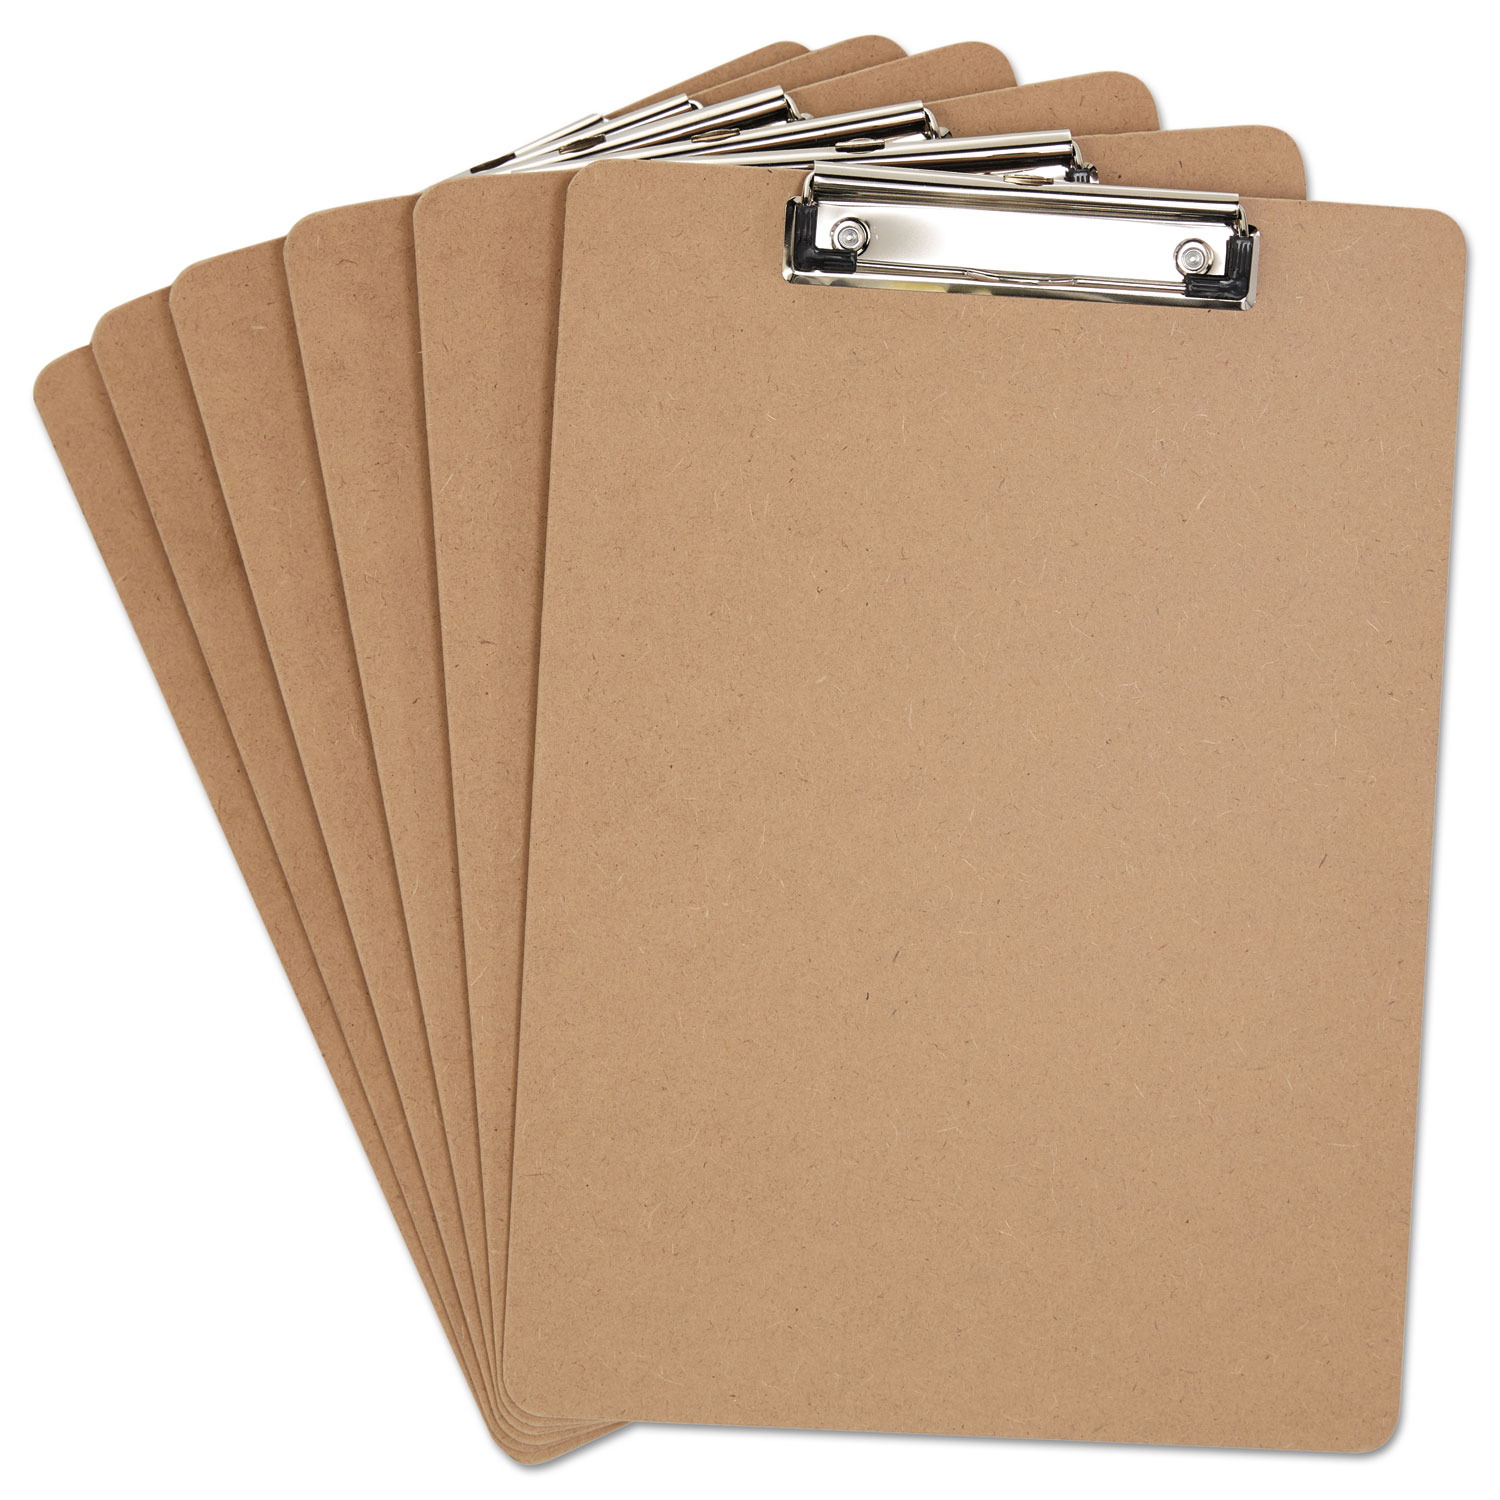 Hardboard Clipboard with Low-Profile Clip, 0.5" Clip Capacity, Holds 8.5 x 11 Sheets, Brown, 6/Pack